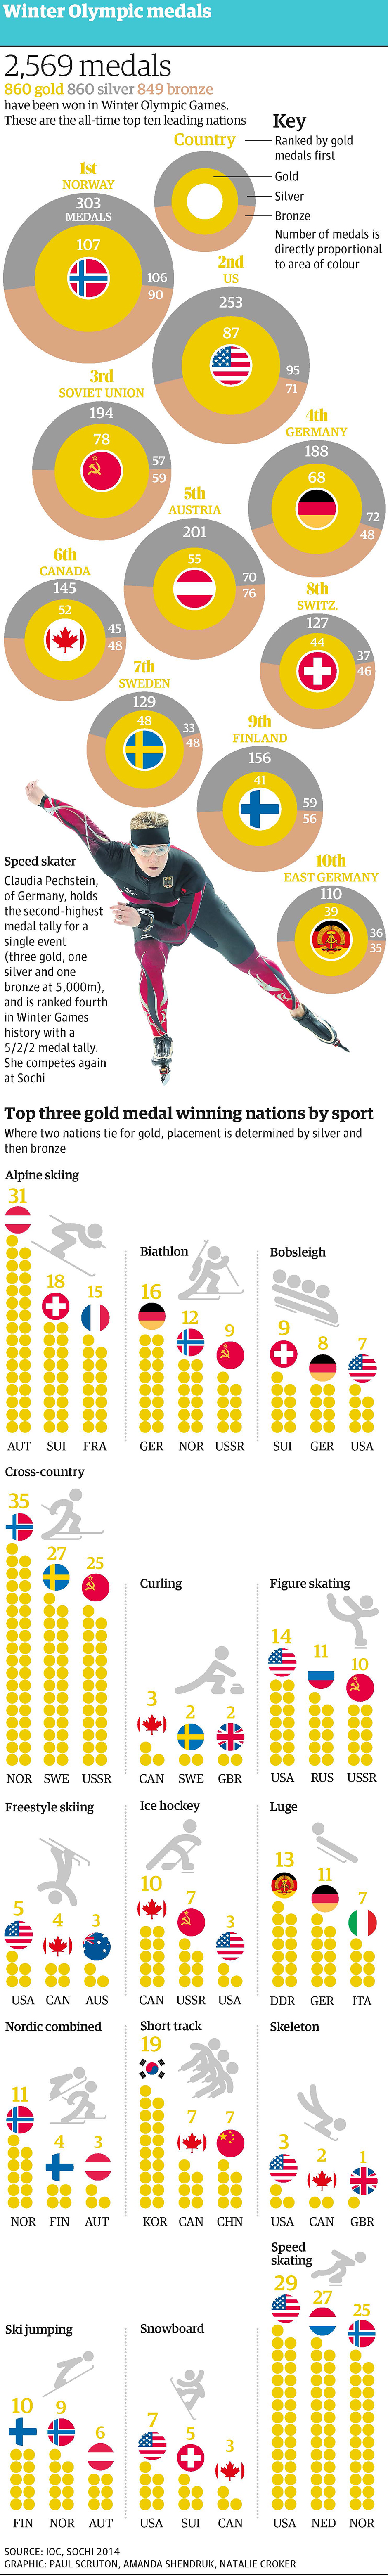 Winter Olympics medals since 1924